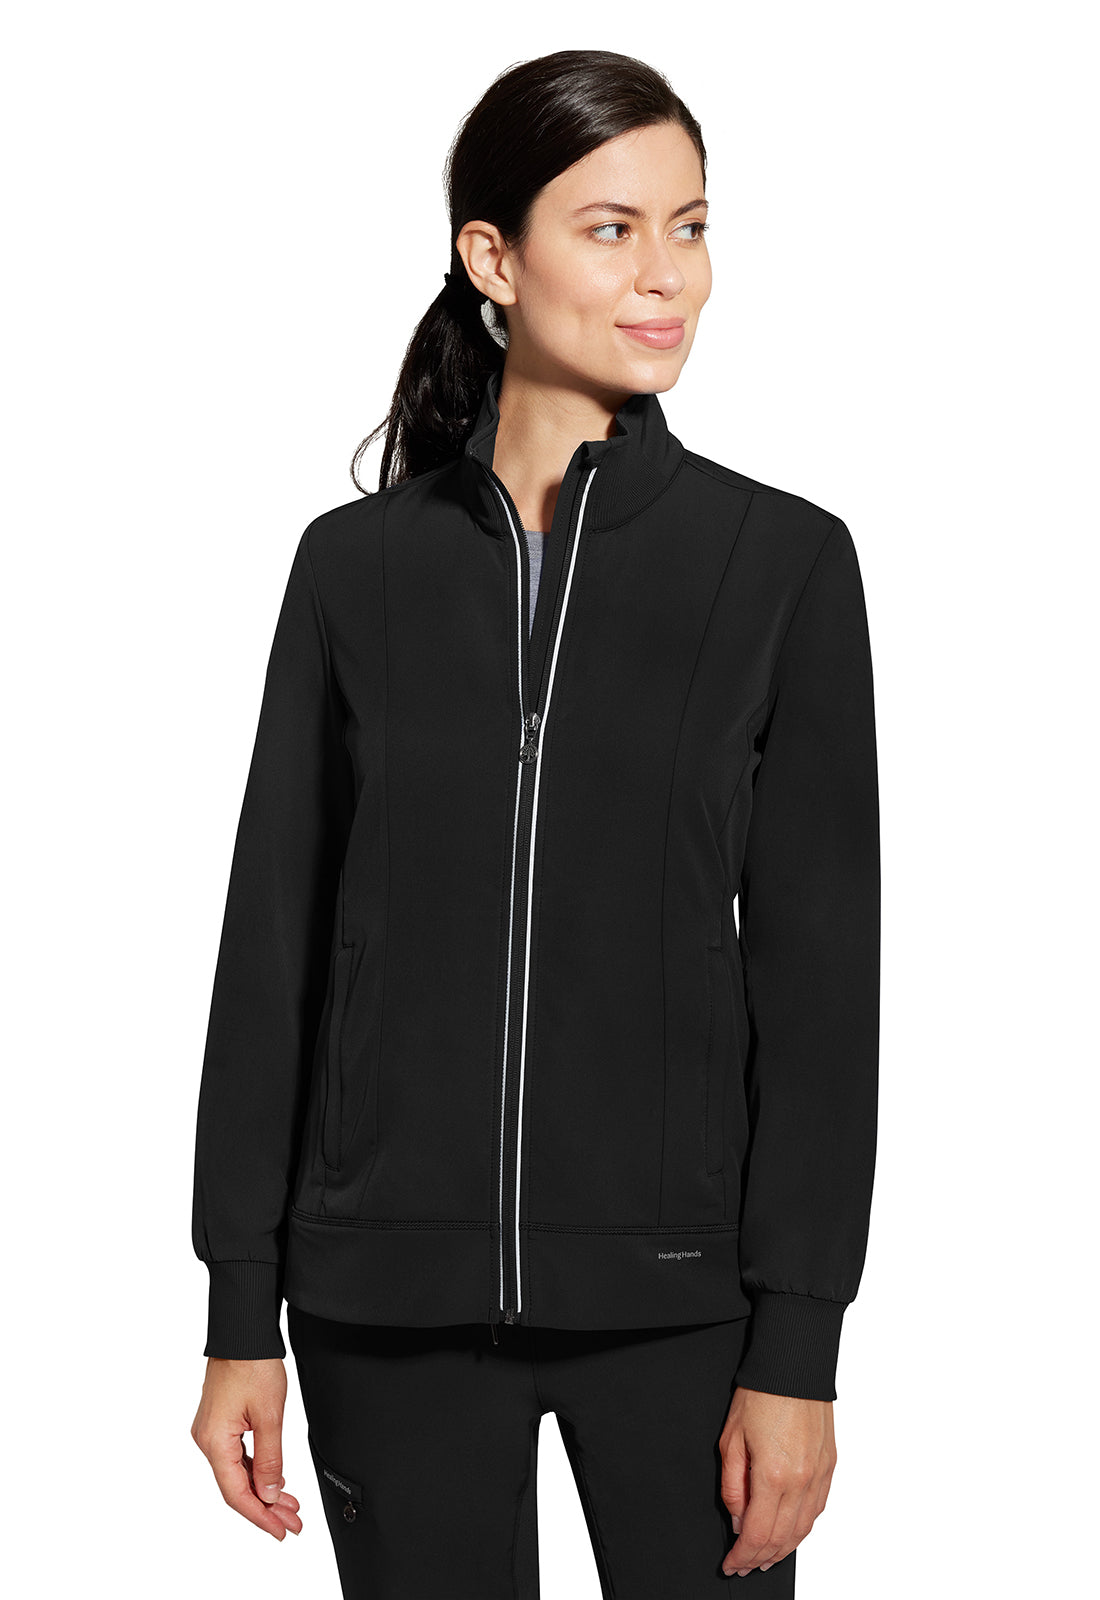 Healing Hands 360 Carly Jacket (3 Colors)